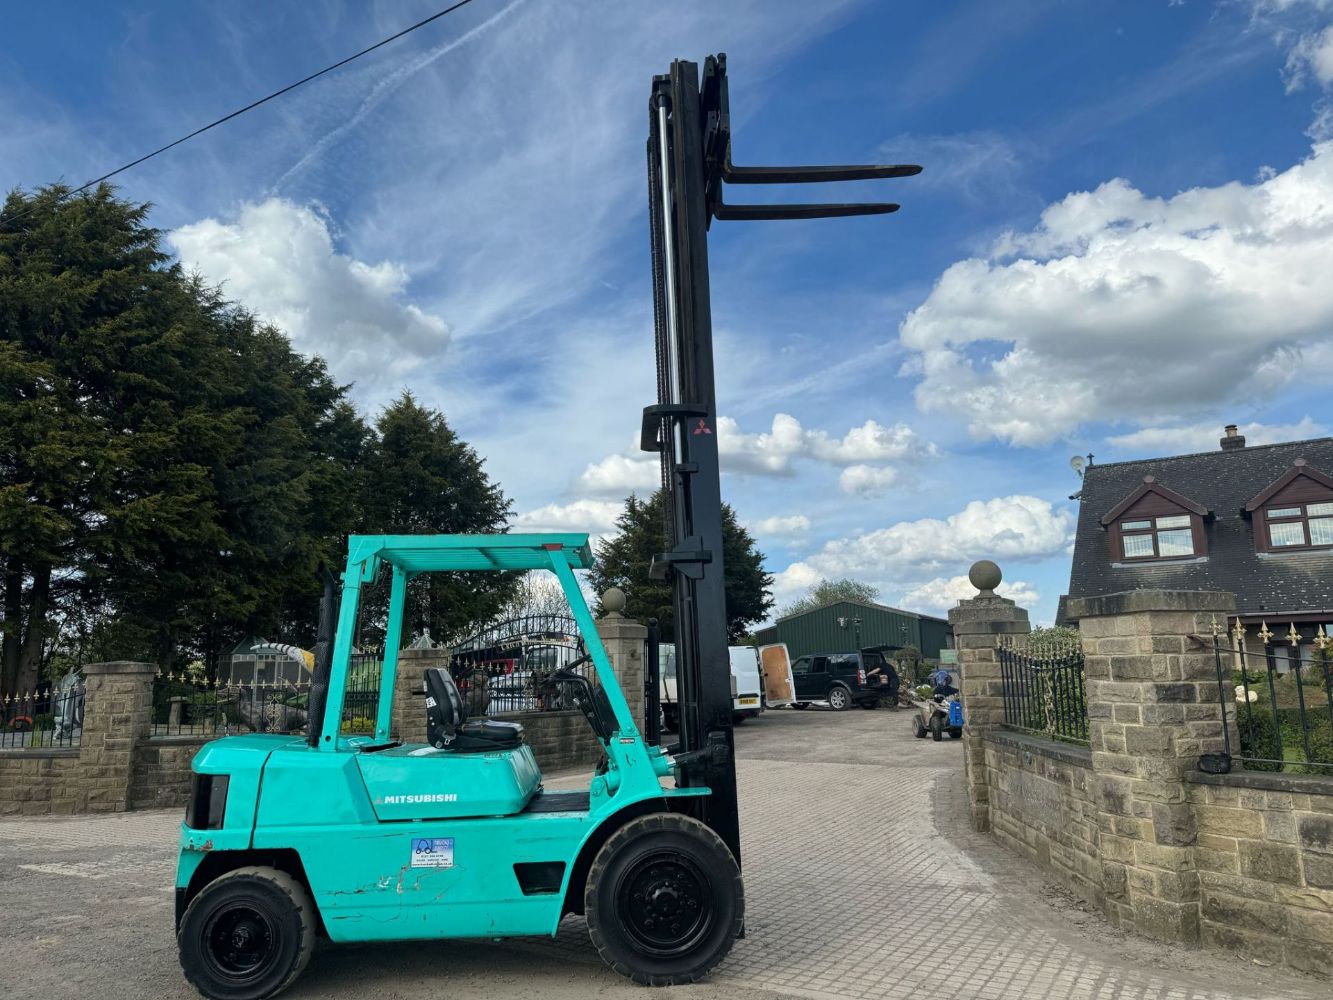 WEDNESDAY 12PM, MITSUBISHI 4 TON DIESEL FORKLIFT. FIAT WORKSHOP VAN, AUDI A5'S, A6'S, A7'S, DIESEL POWERED FORKLIFT, PREMIUM WATCHES + MORE